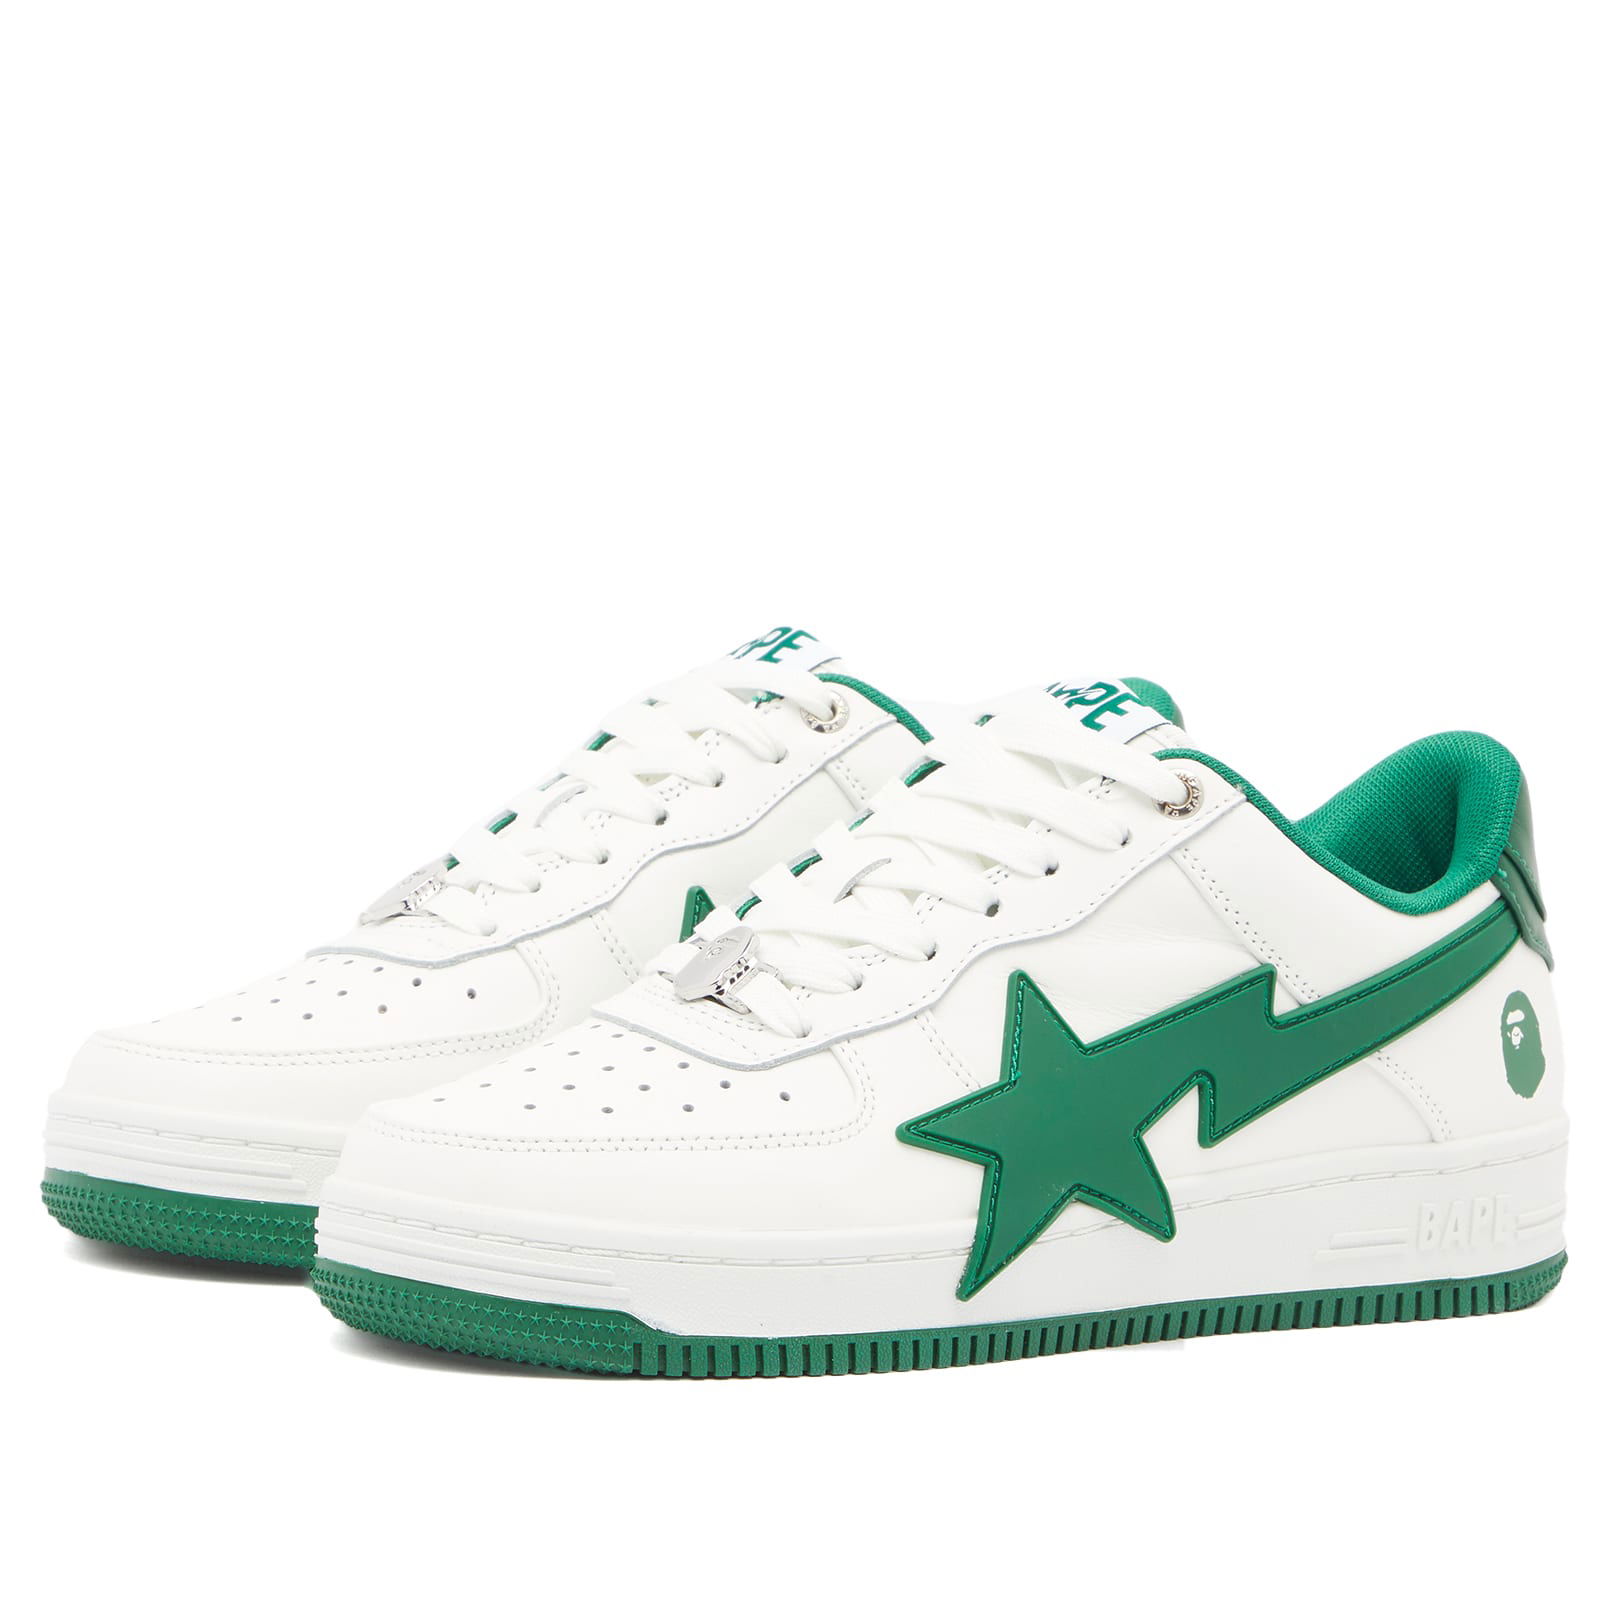 A Bathing Ape Bape Sta OS in Green, Size UK 10 | END. Clothing